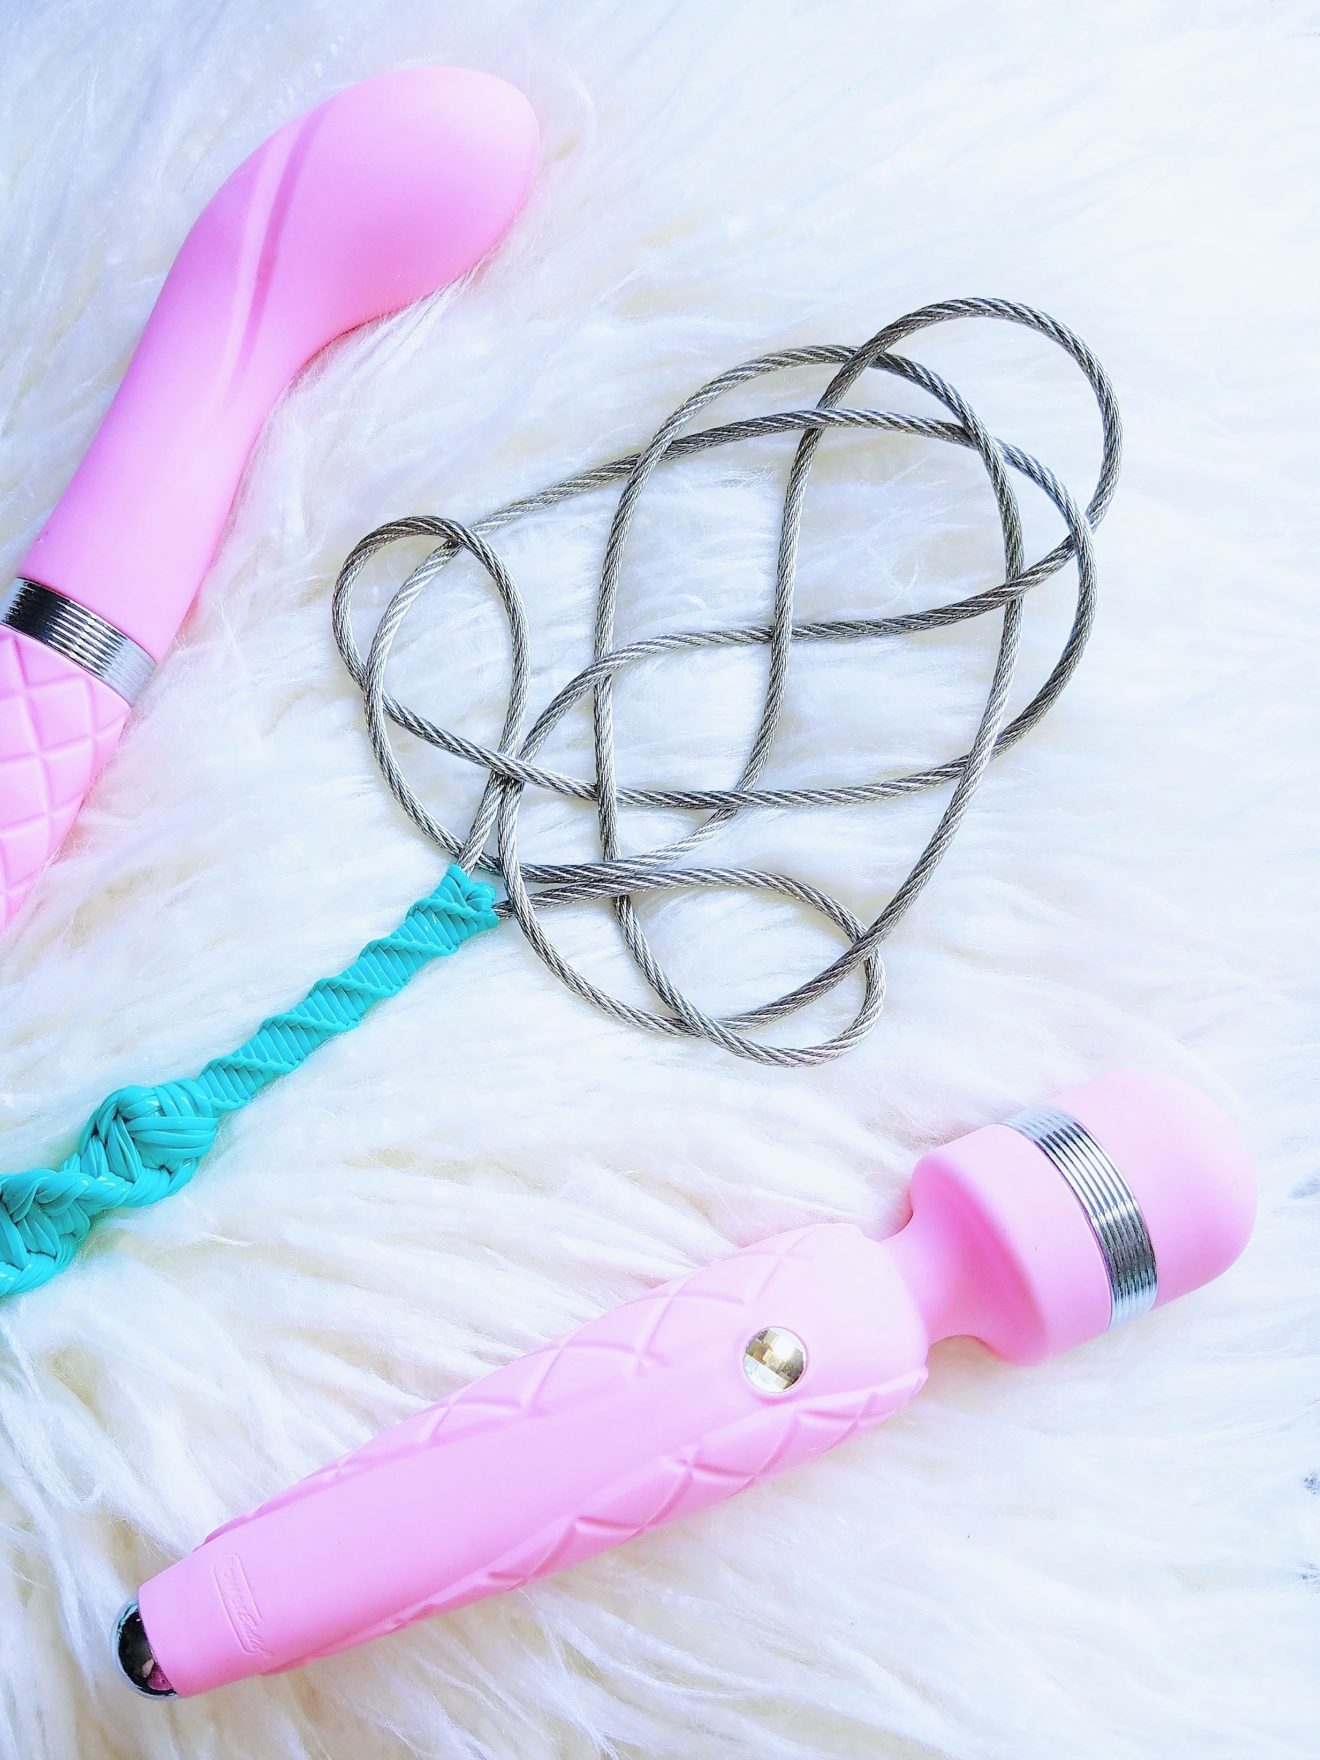 [Image: Pillow Talk Sassy next to Pillow Talk Cheeky and Kink Nerd Toys rug beater paddle]